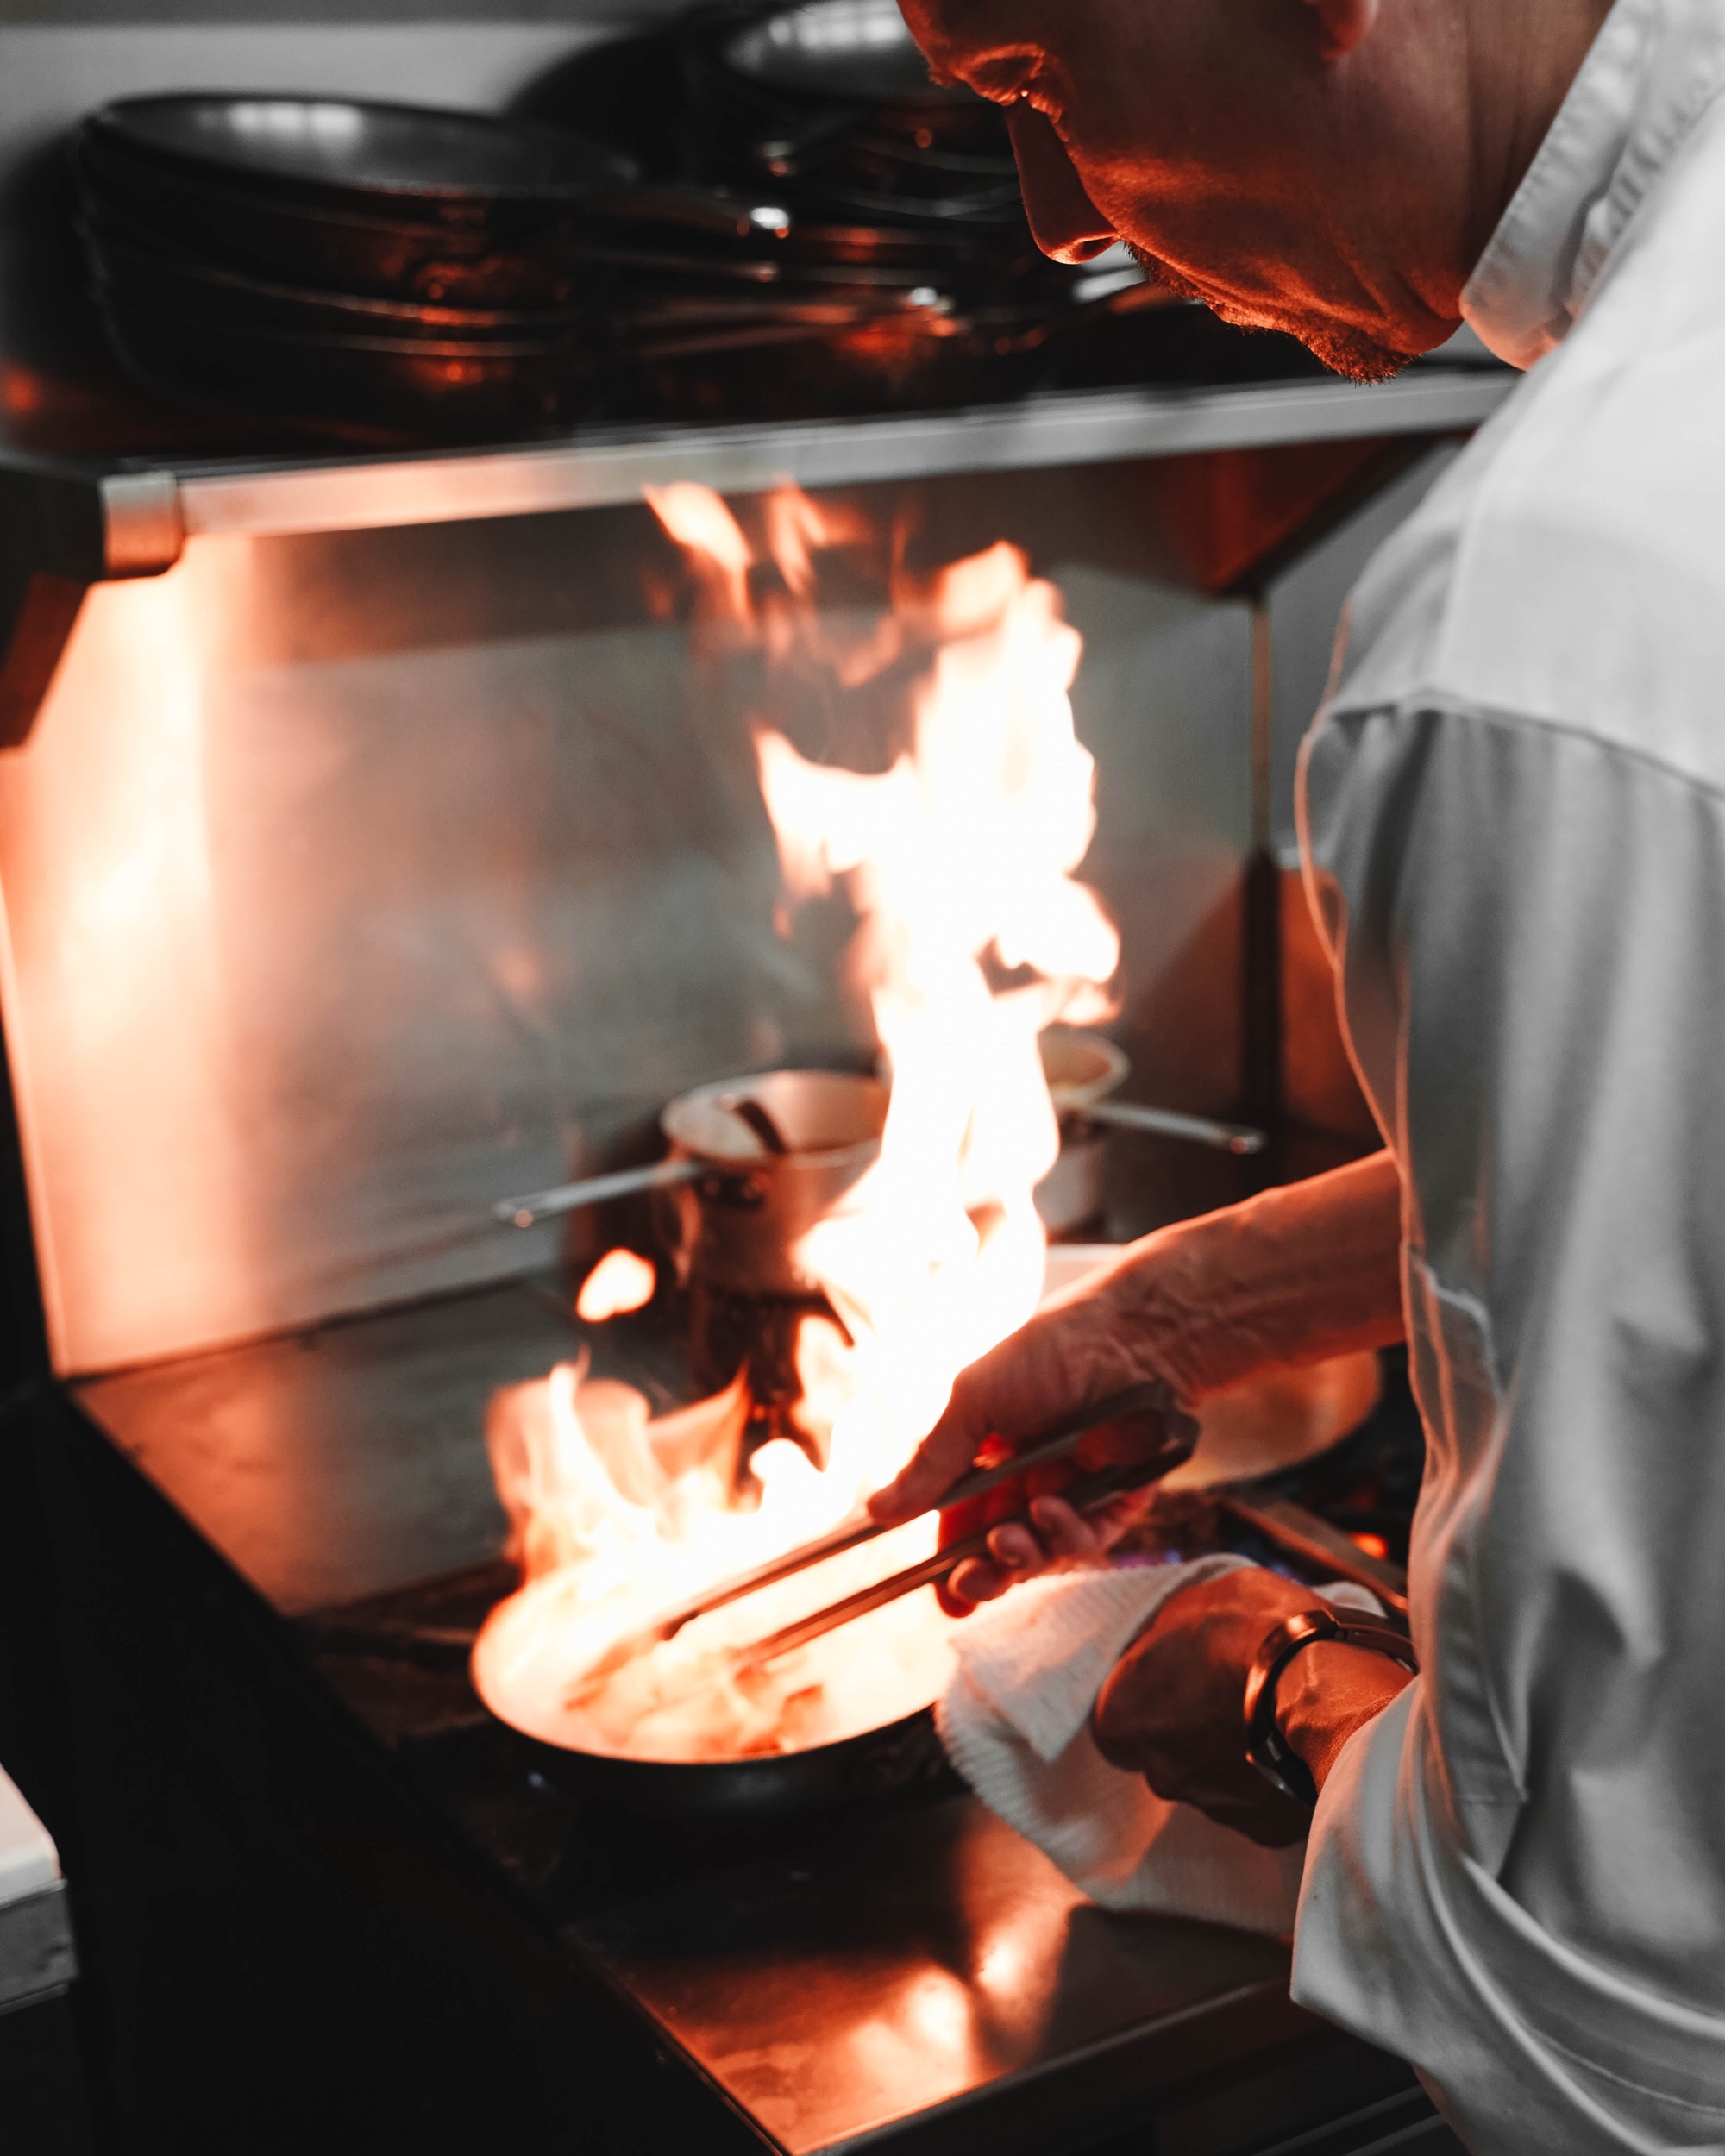 A restaurant chef cooking over the stove